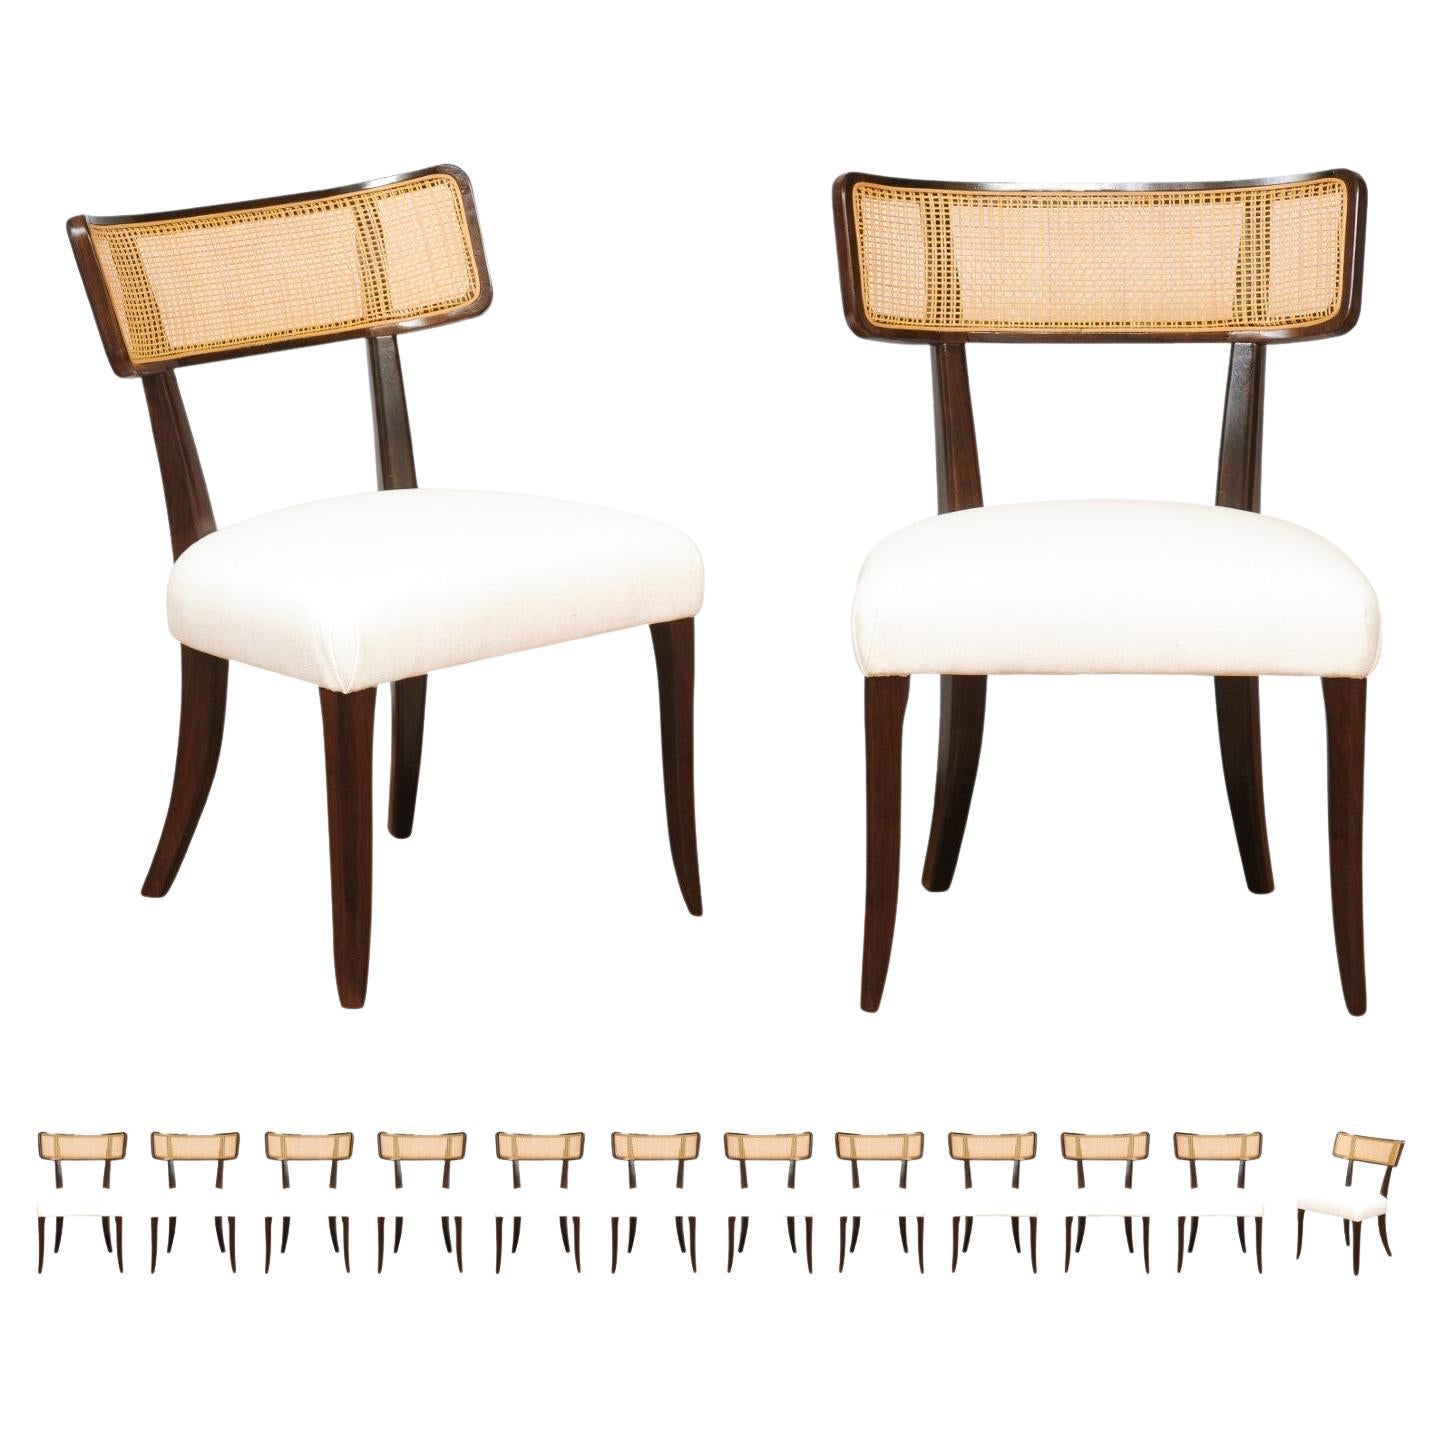 Stunning Set of 14 Klismos Cane Side Chairs by Edward Wormley, circa 1948 For Sale